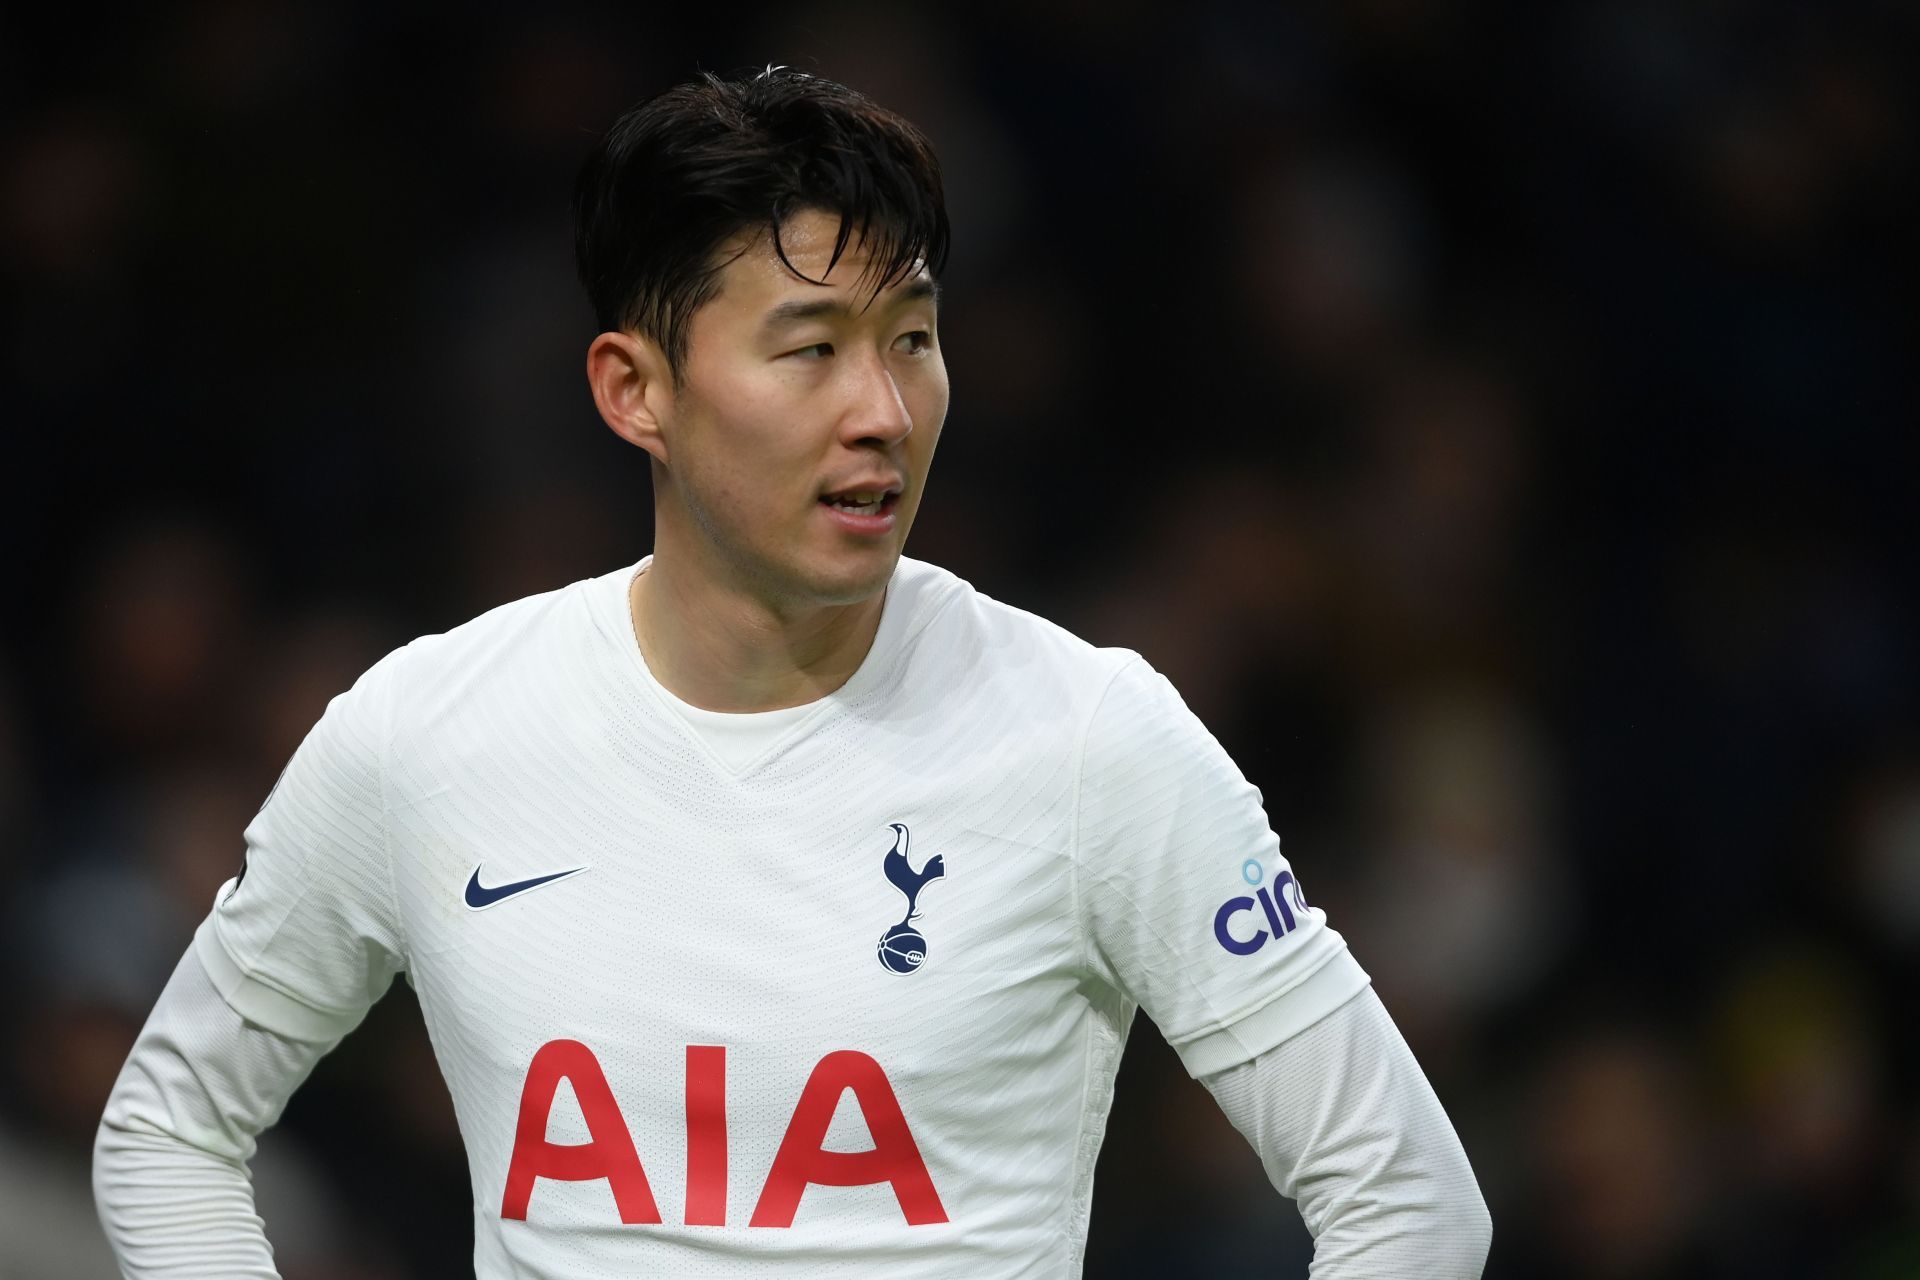 Son-Heung Min is one of the most valuable Tottenham Hotspur players.